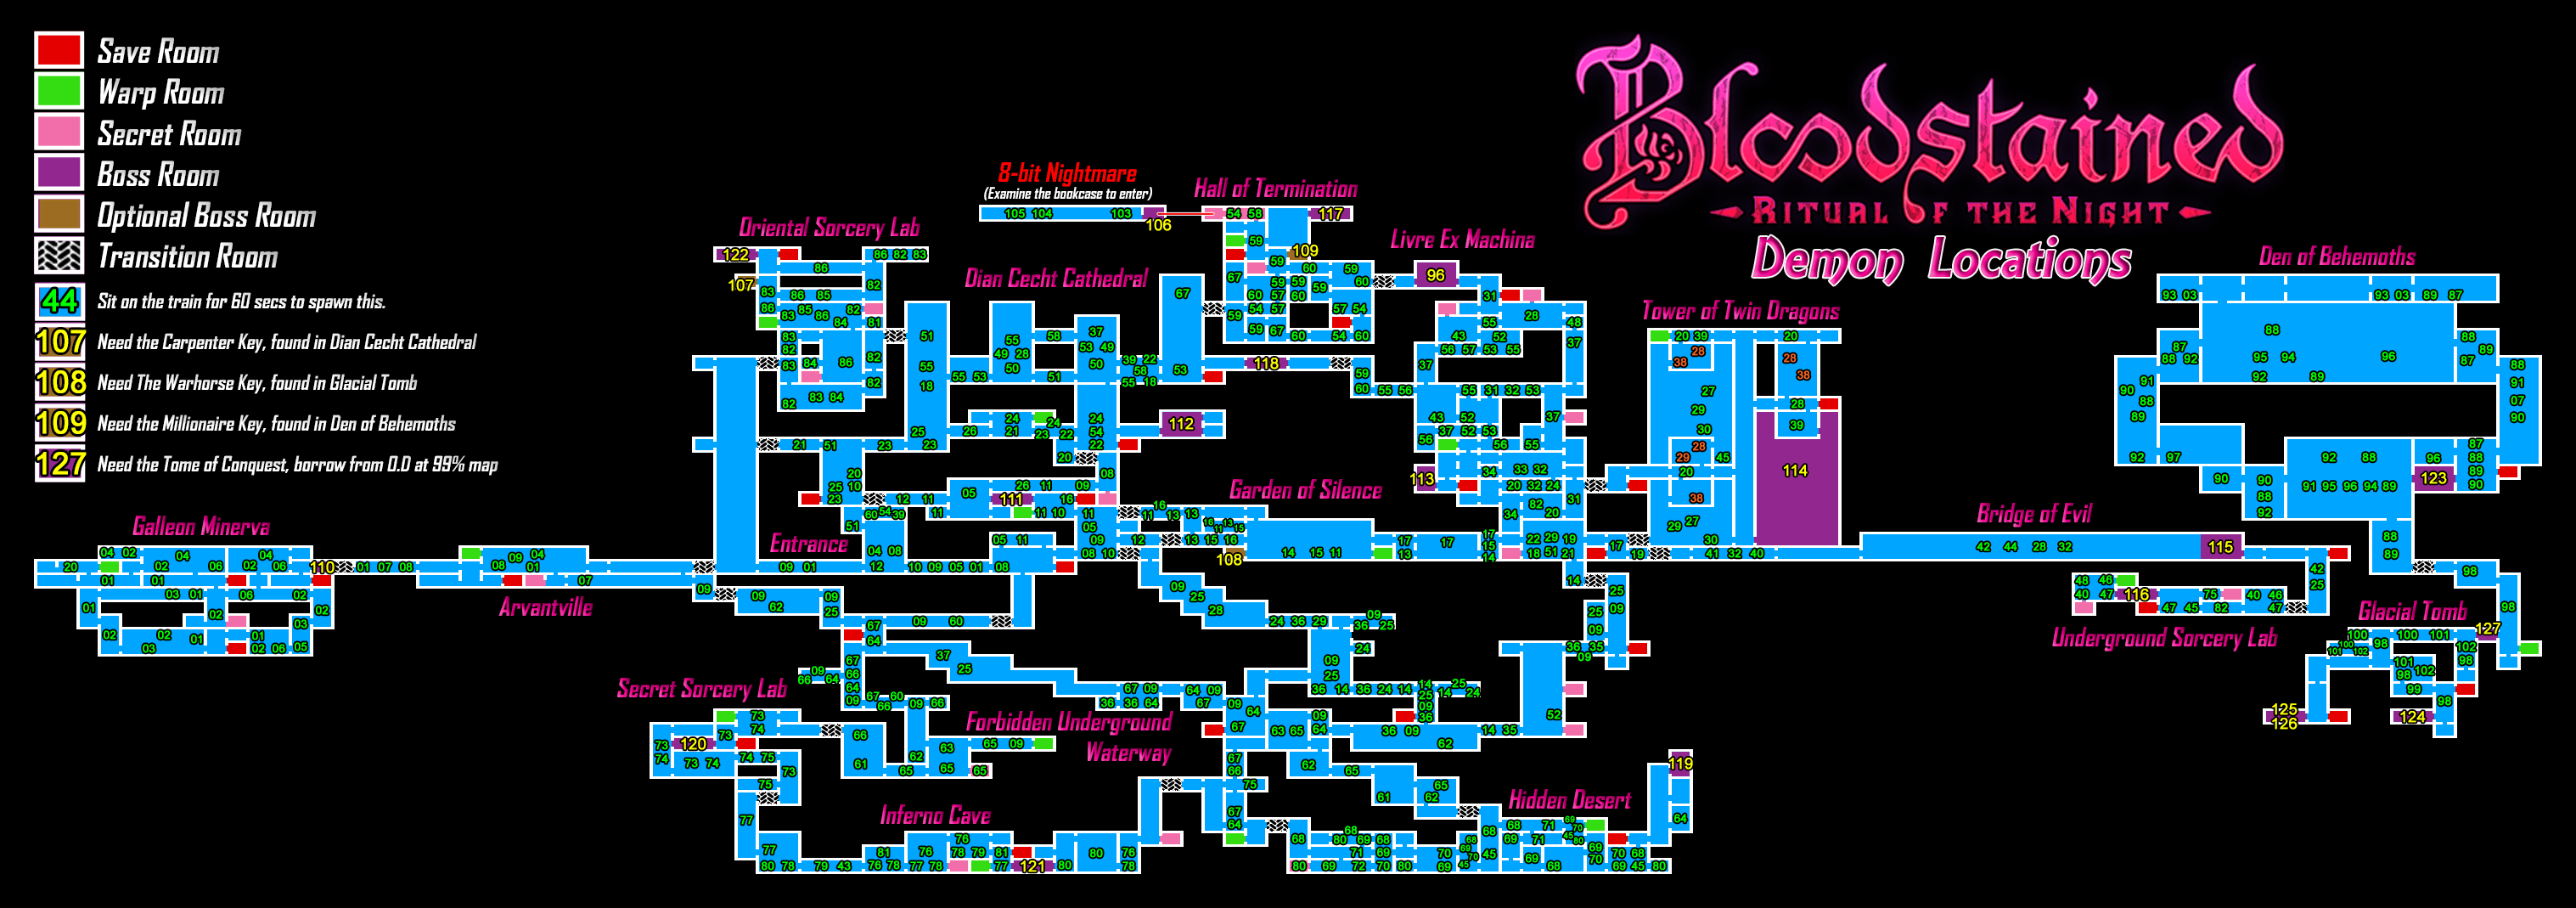 Bloodstained Ritual Of The Night Definitive Collectible Guide